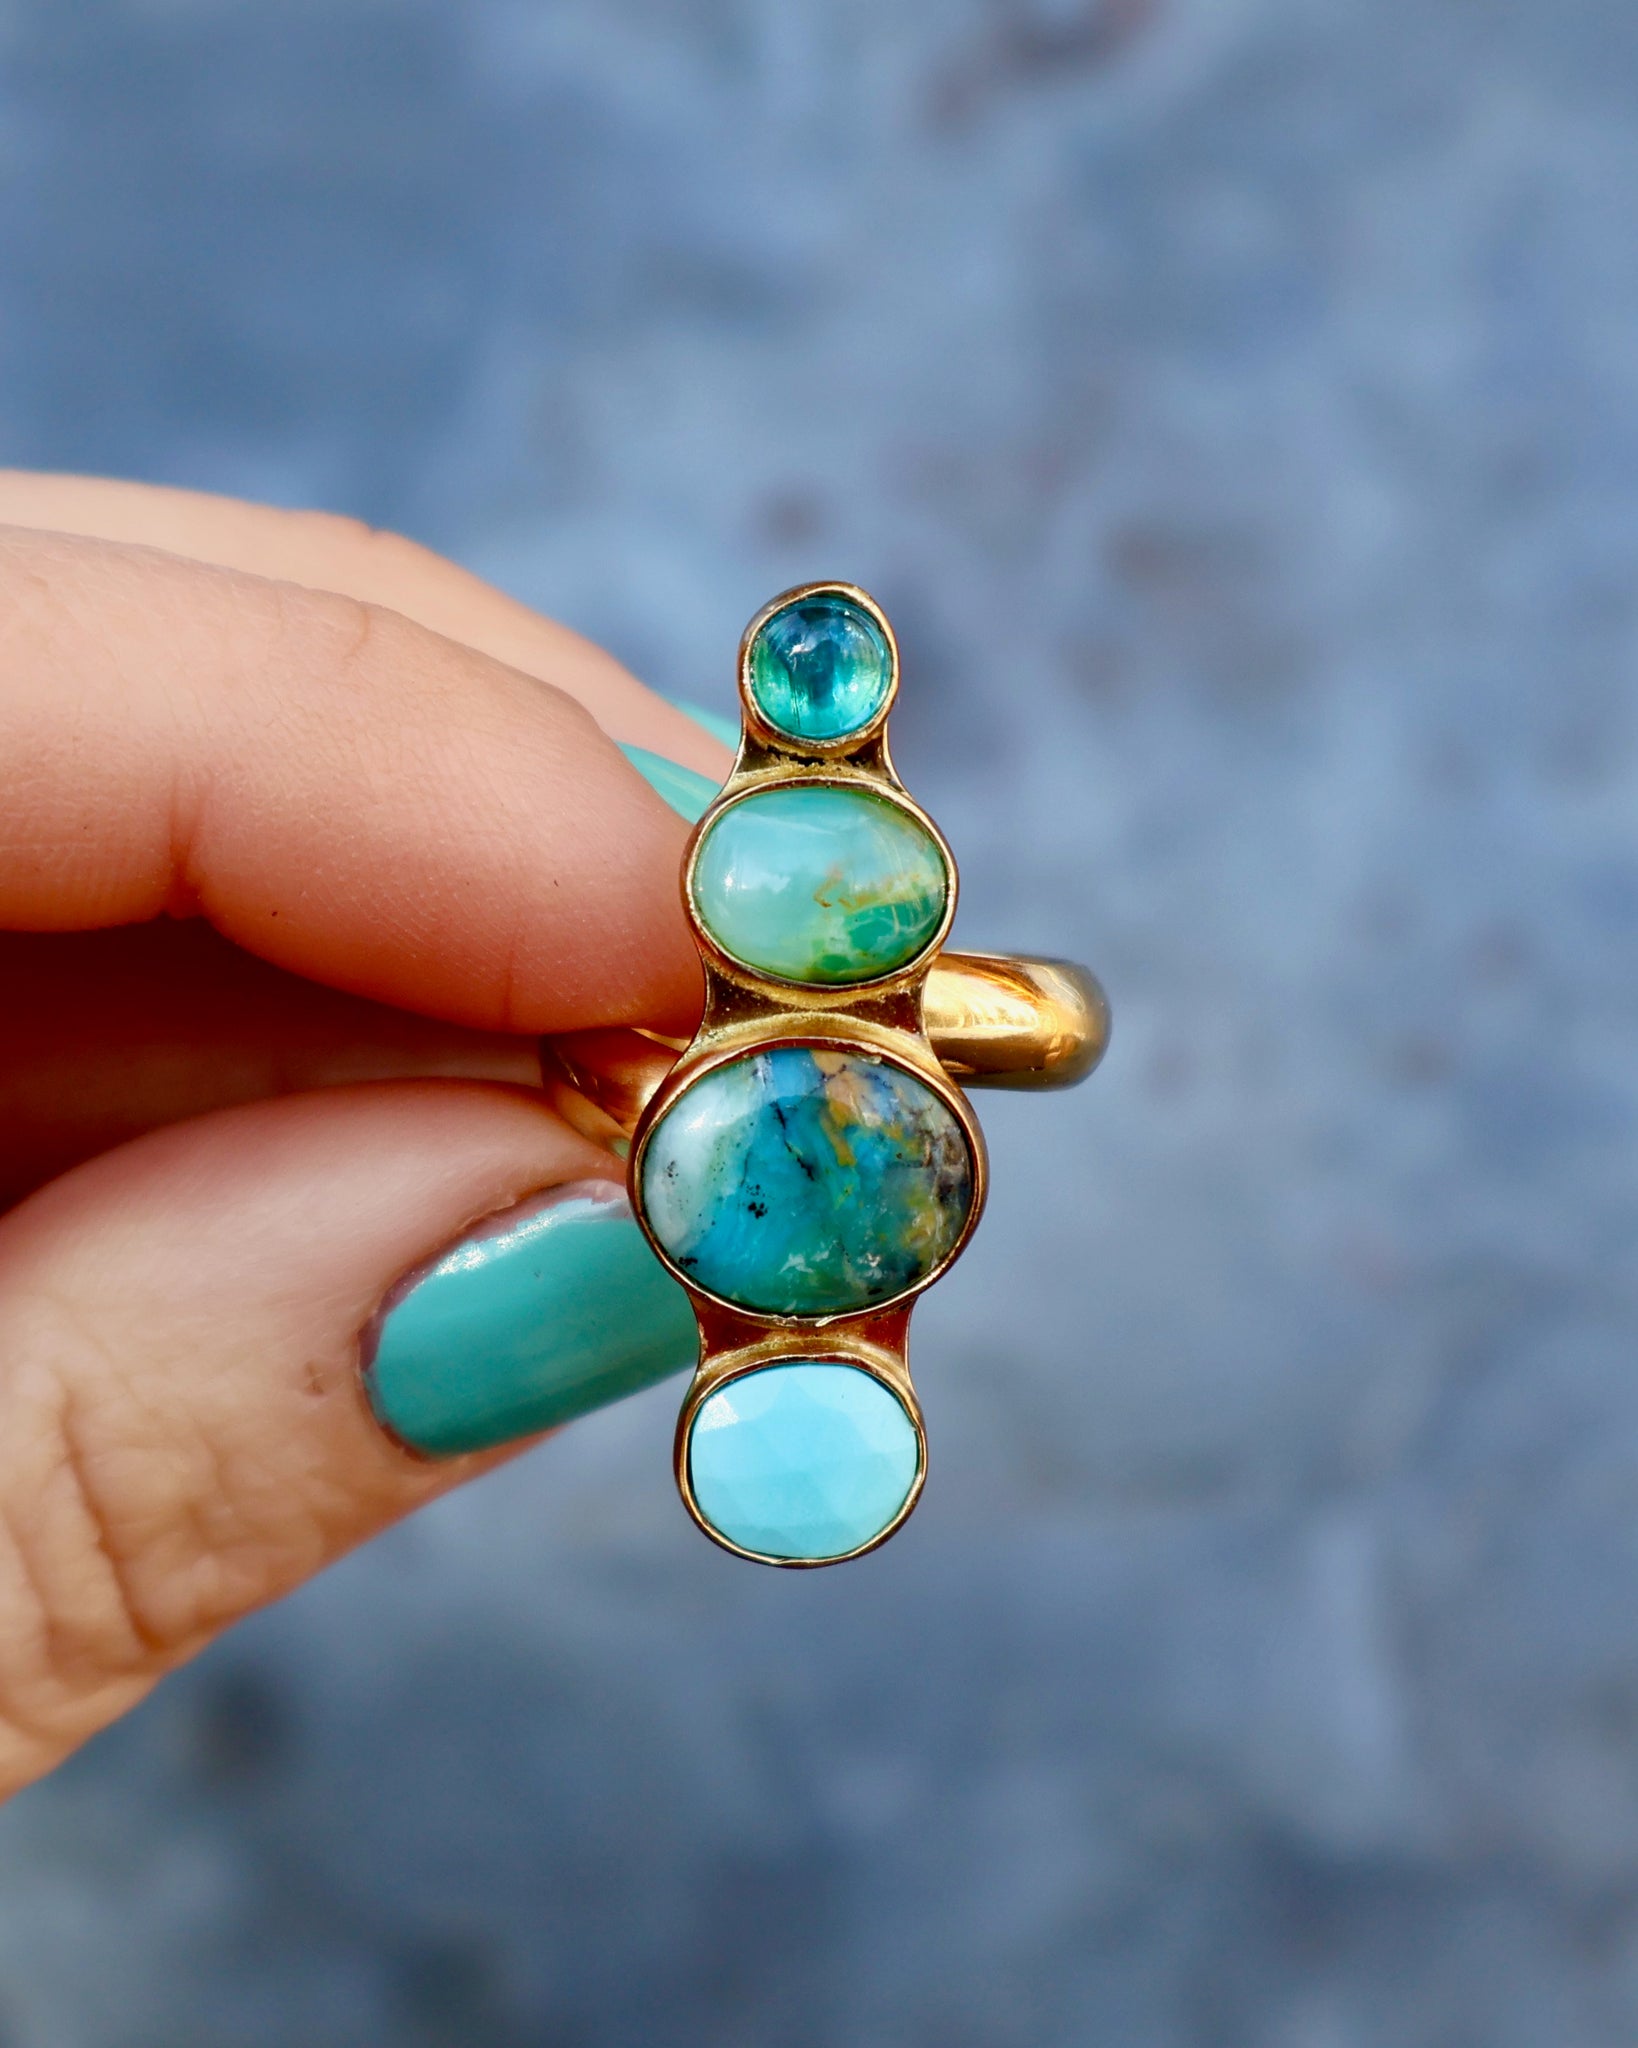 Winter Thaw Ring Neon Apatite, Peruvian Opal & Turquoise in Gold Alchemia, Adjustable Size WT10